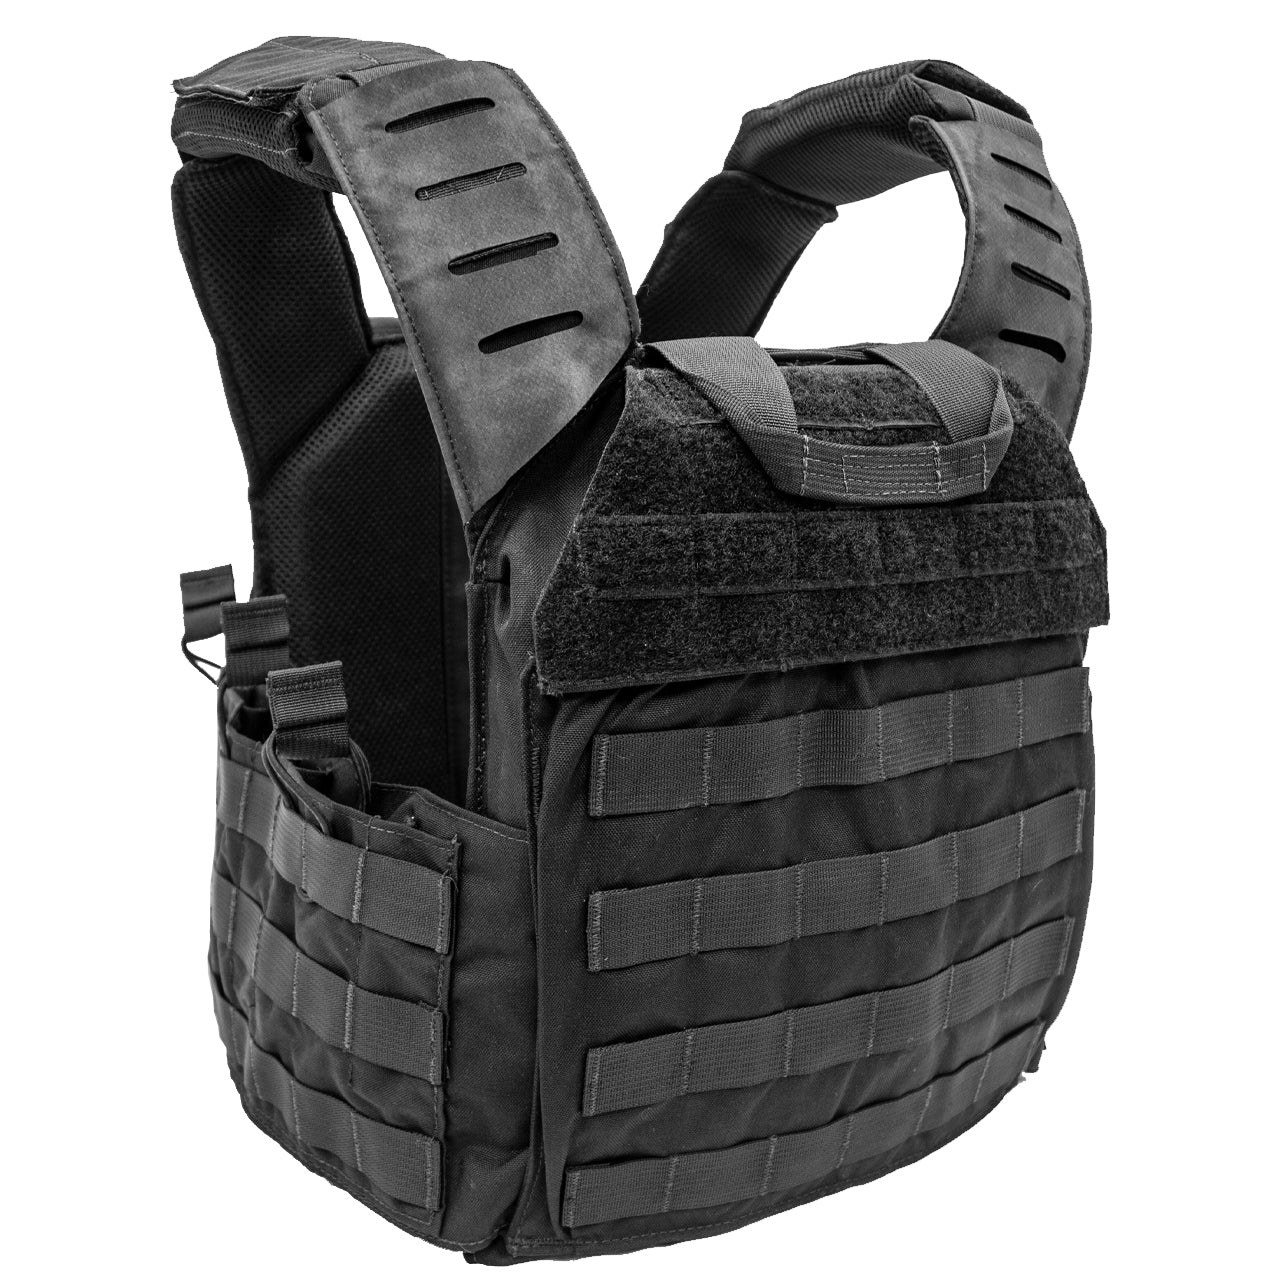 A Shellback Tactical Banshee Elite 2.0 Plate Carrier on a white background.